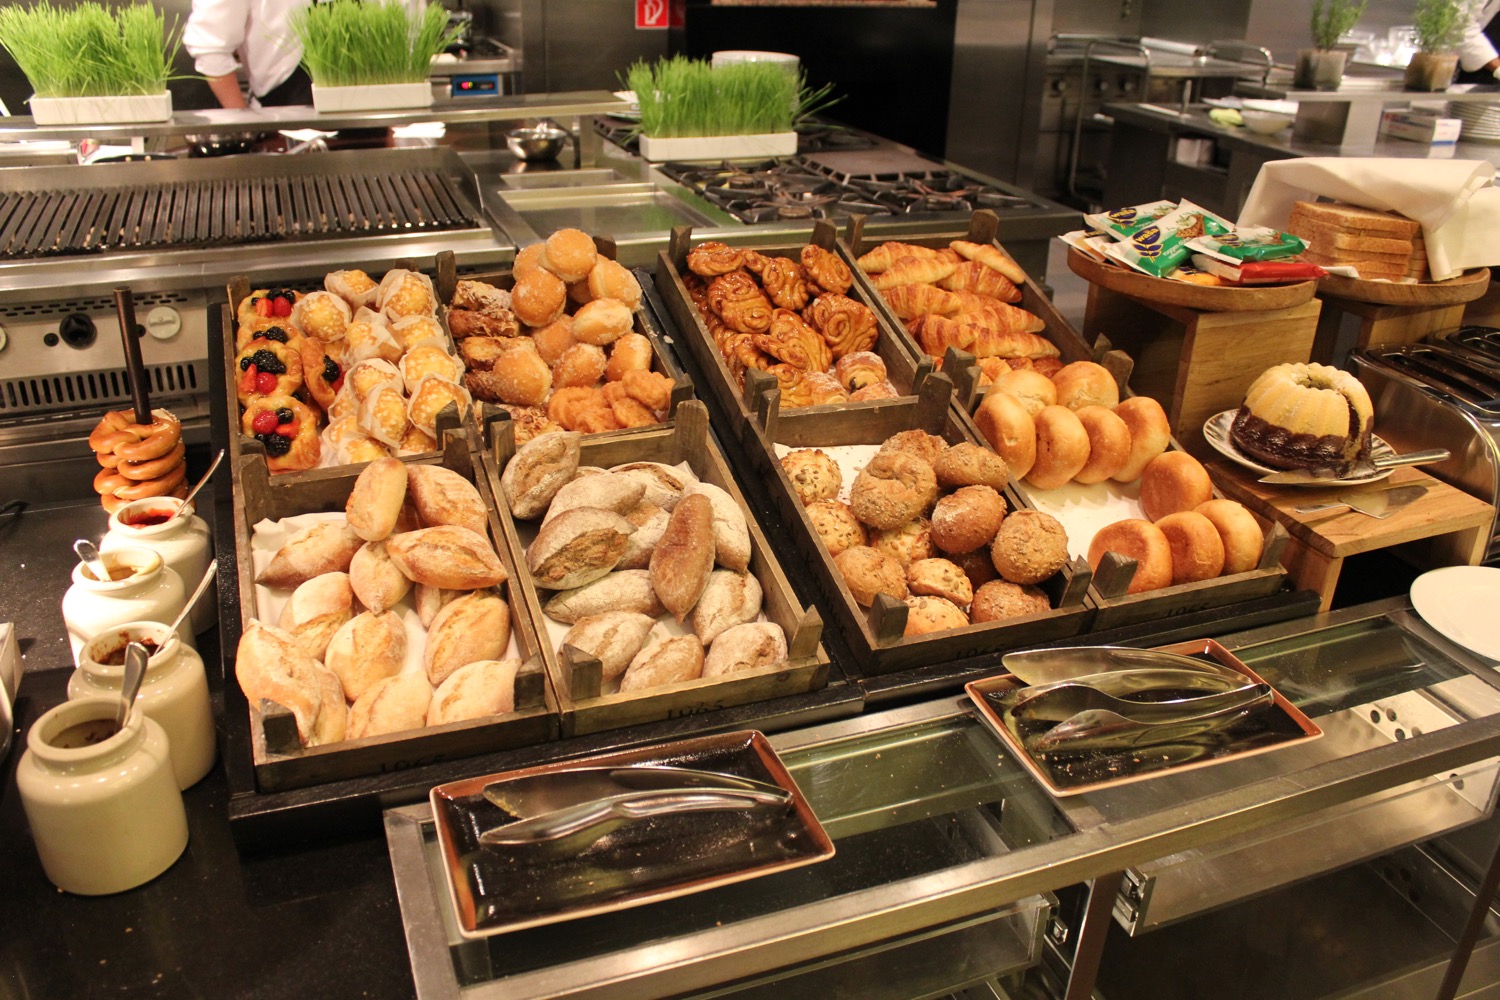 a variety of breads in a kitchen